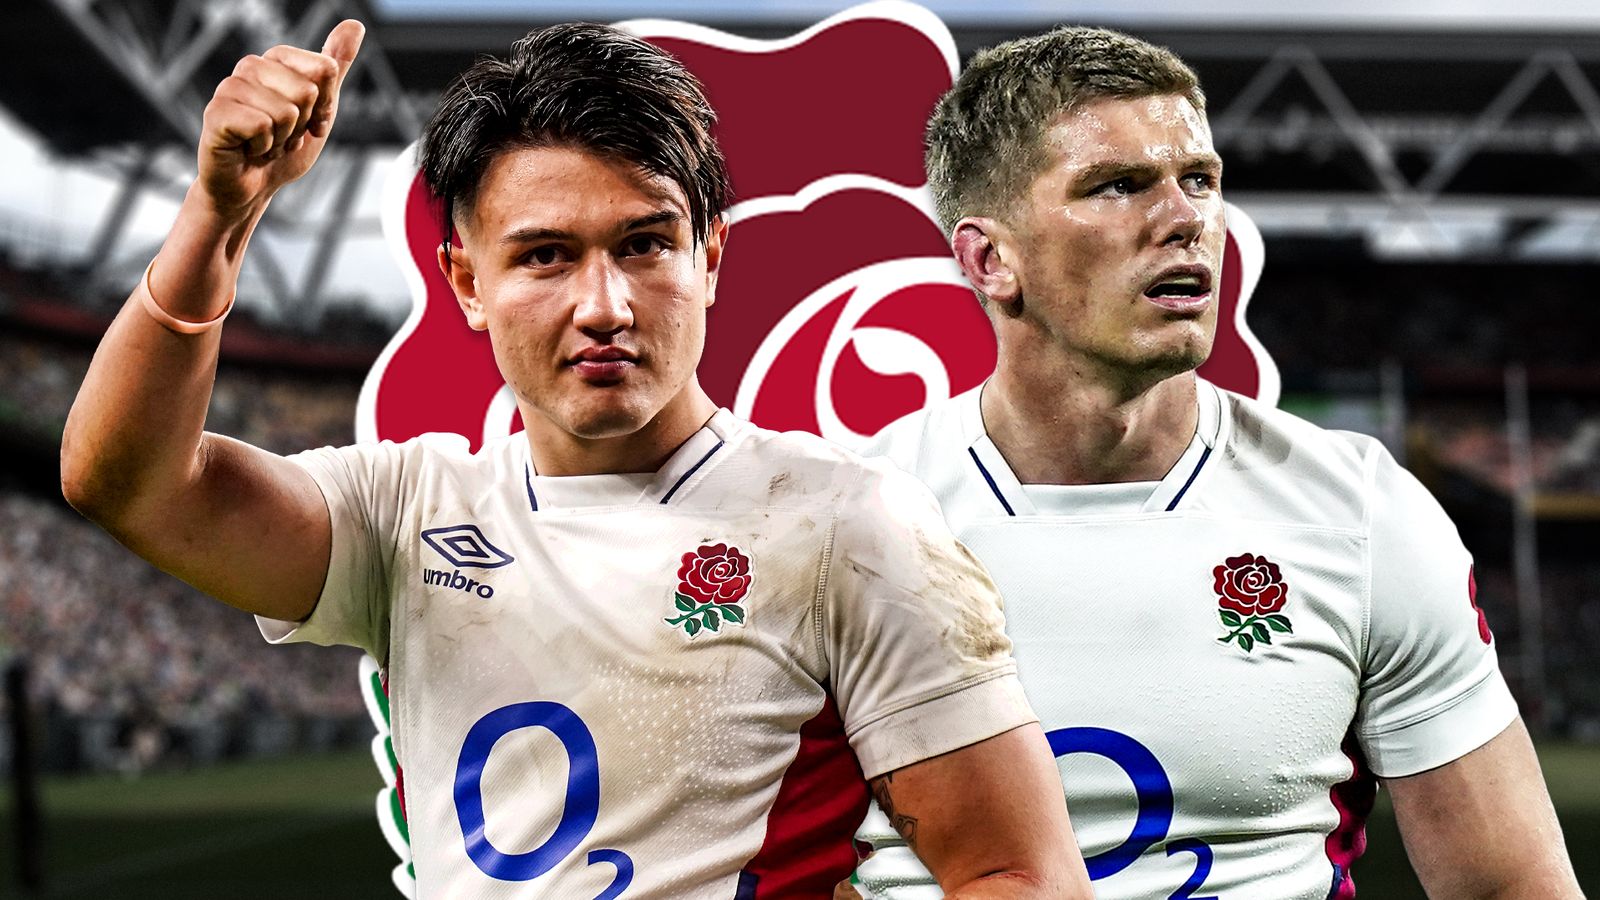 Will Greenwood: Owen Farrell is Mick Jagger, Marcus Smith is Harry Styles but England only need one lead singer